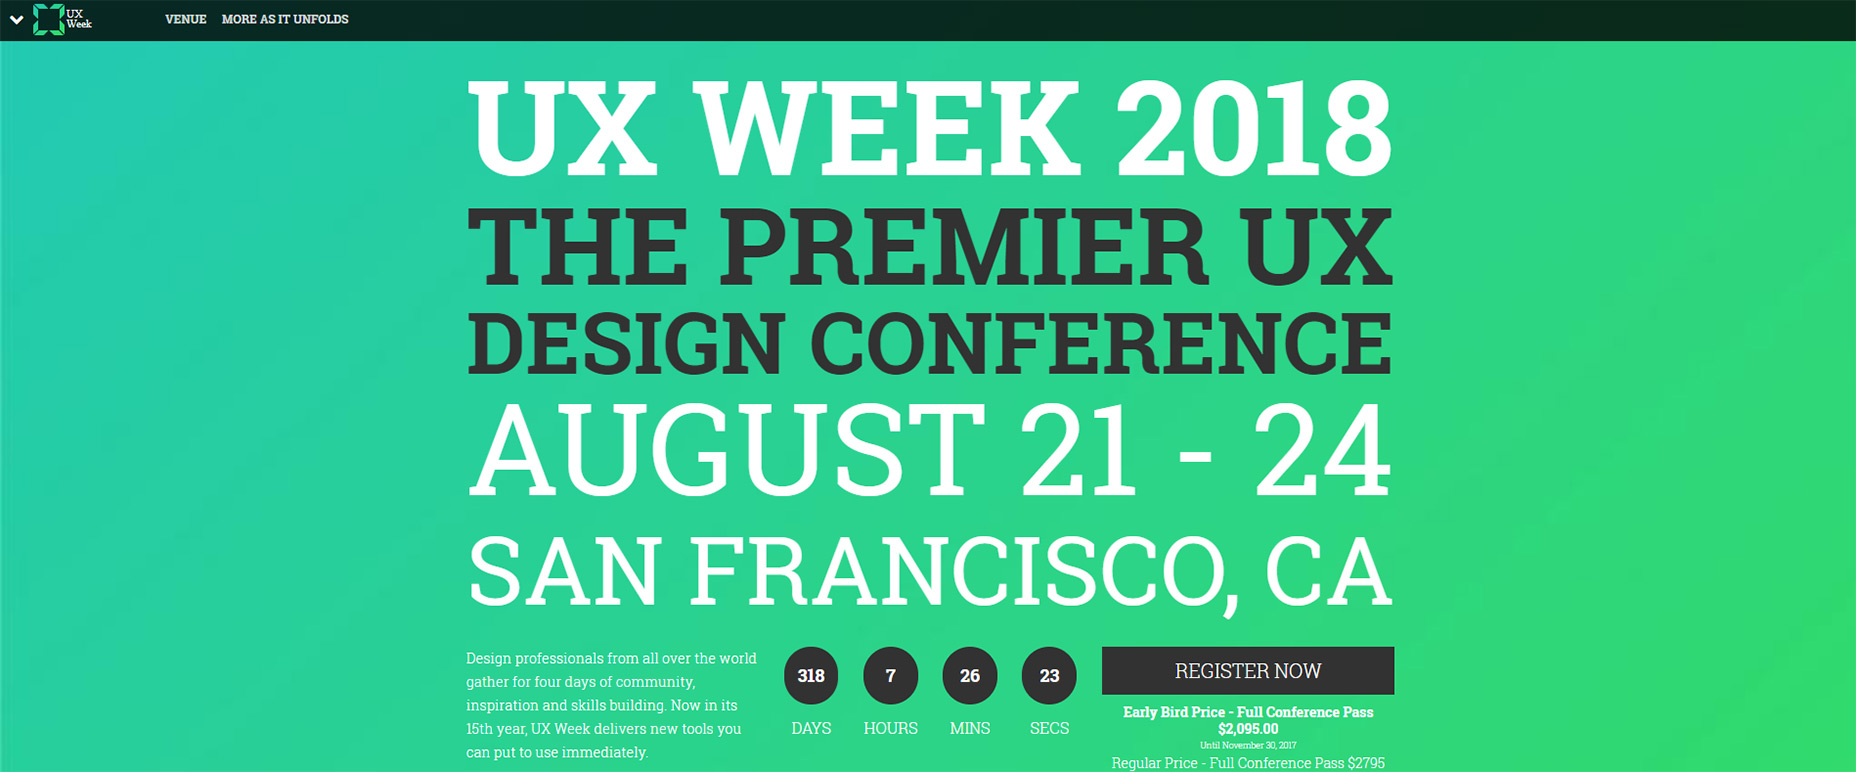 07-ux-week-conference